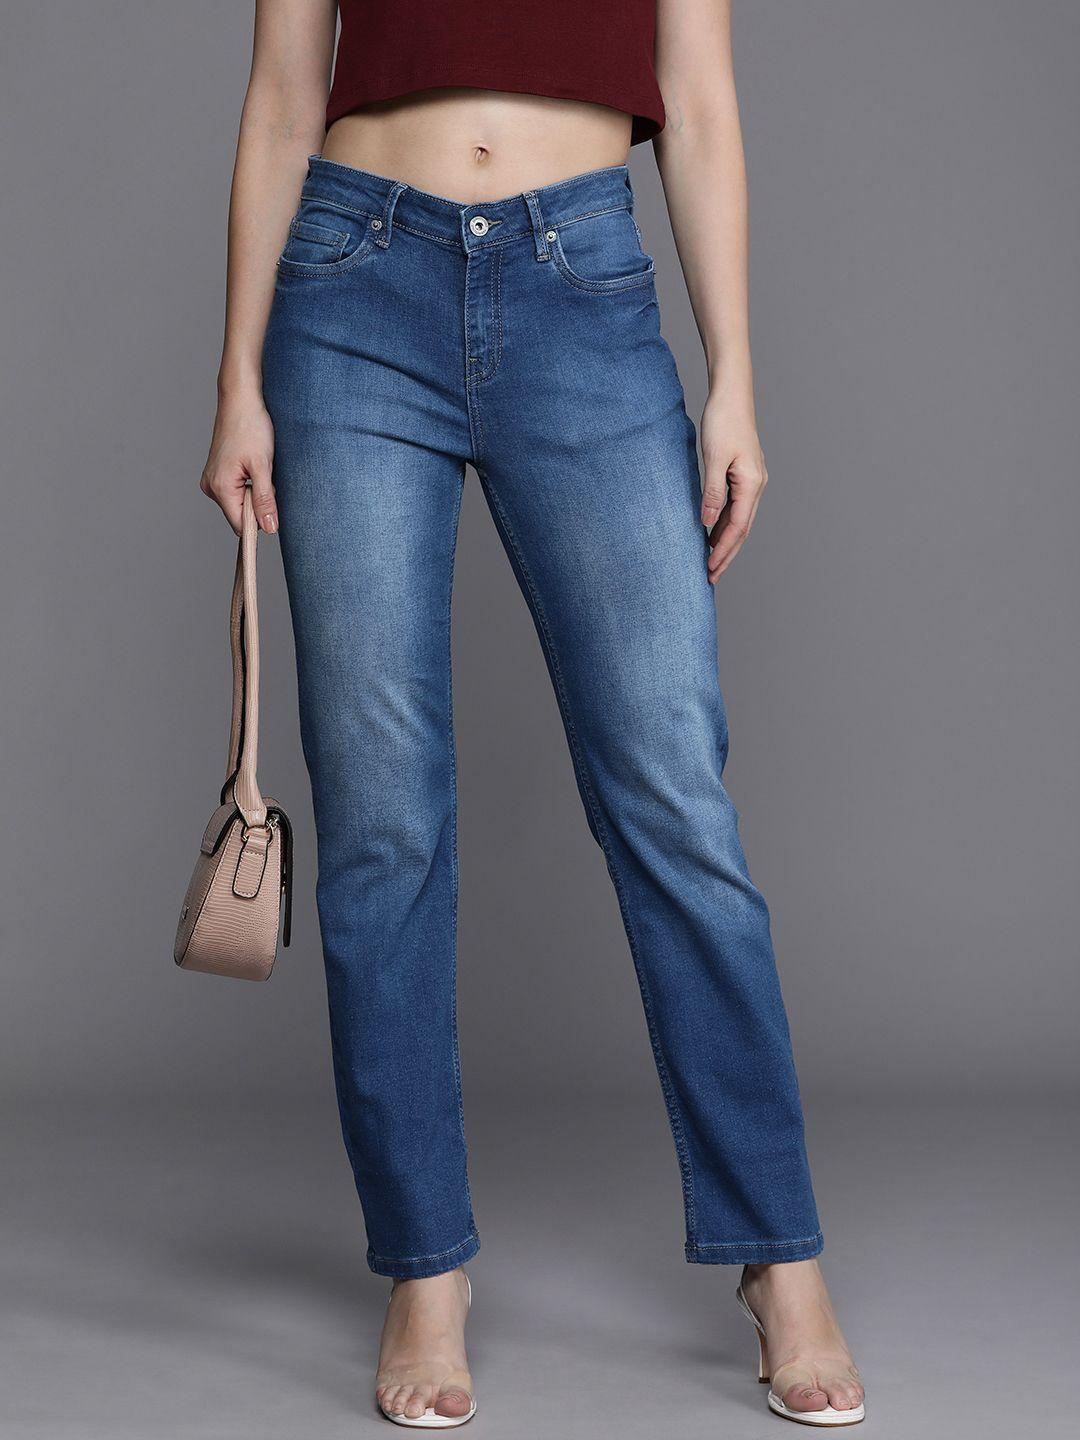 kenneth-cole-women-straight-fit-light-fade-stretchable-jeans